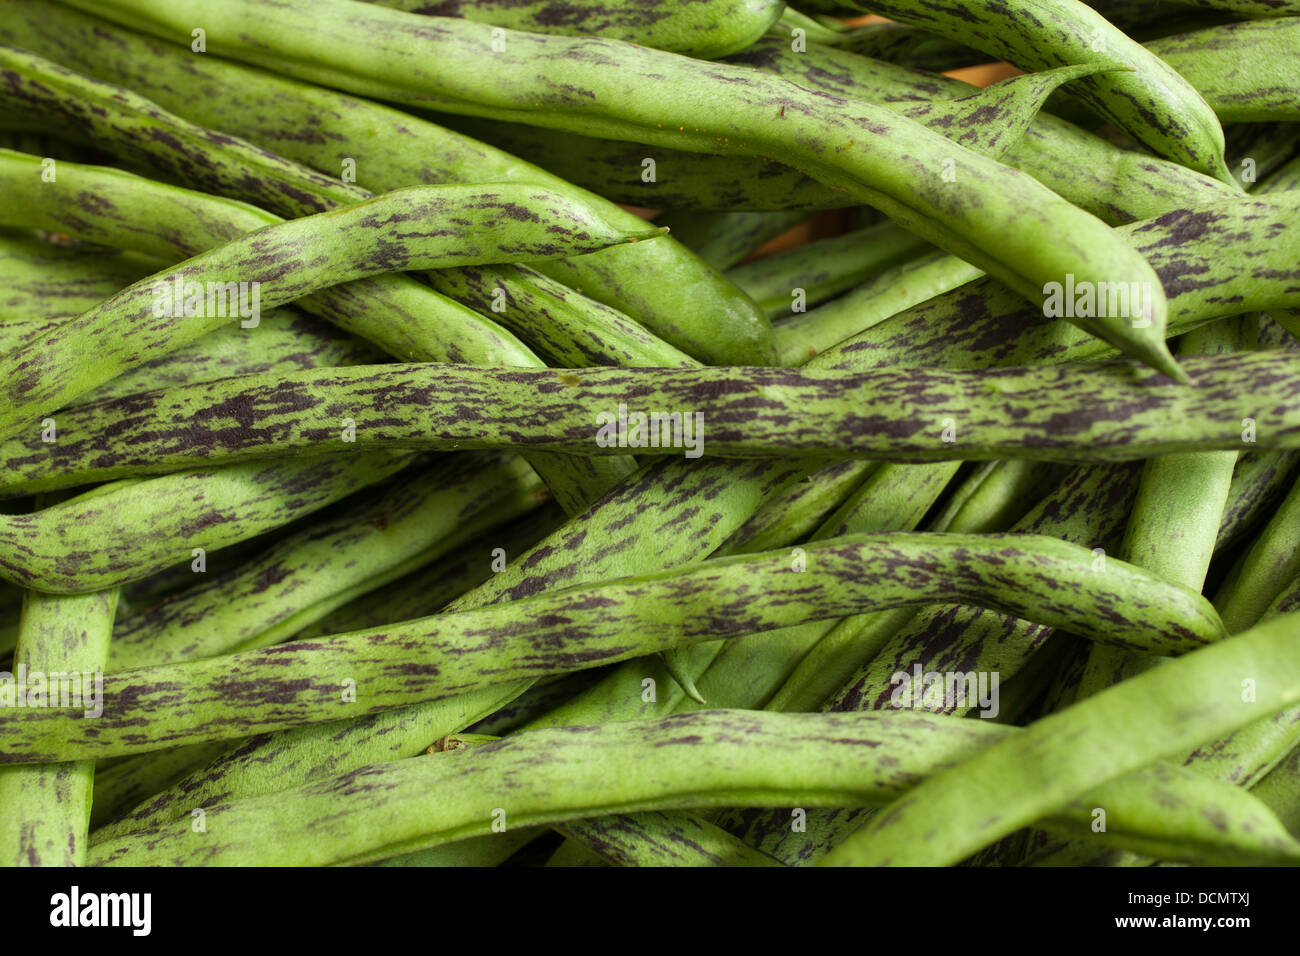 A heritage variety, rattlesnake beans are a delicious pole bean. Stock Photo